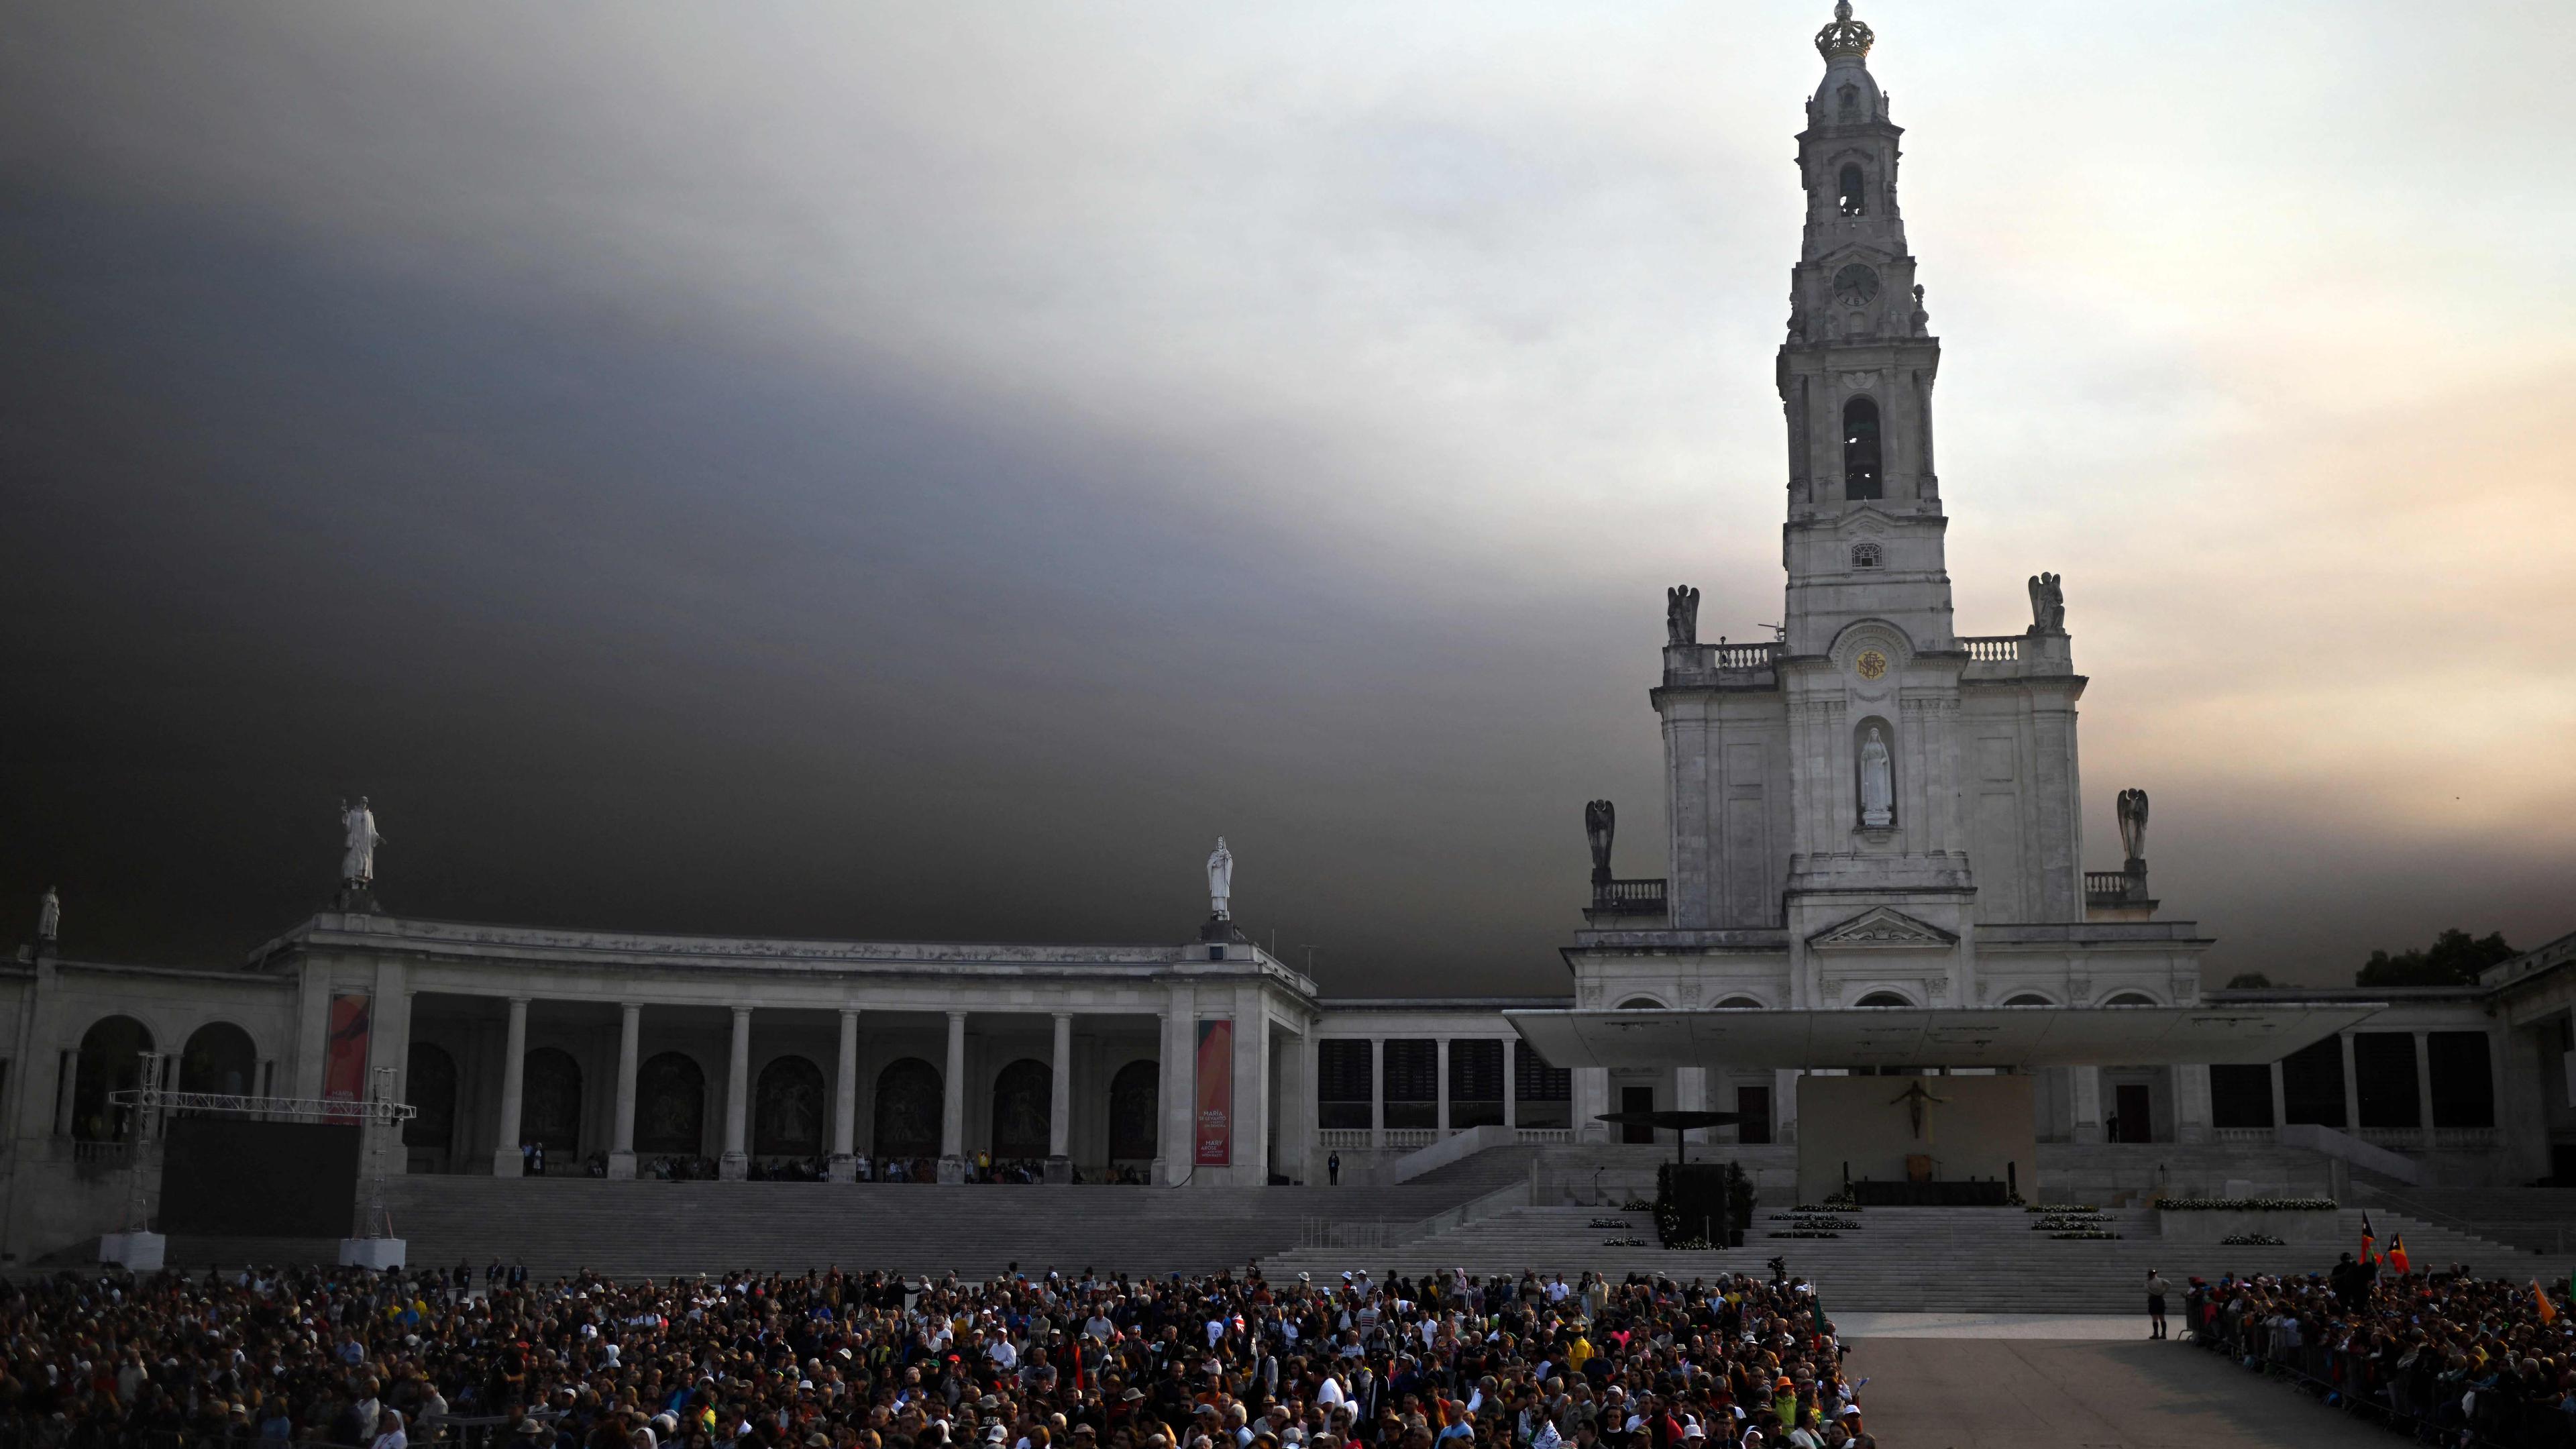 TOPSHOT - Pilgrims gather at daybreak in the Sanctuary of Our Lady of Fatima, before the visit of Pope Francis, in Fatima on August 5, 2023. Around one million pilgrims from all over the world will attend the World Youth Day, the largest Catholic gathering in the world, created in 1986 by John Paul II. (Photo by Patricia DE MELO MOREIRA / AFP)